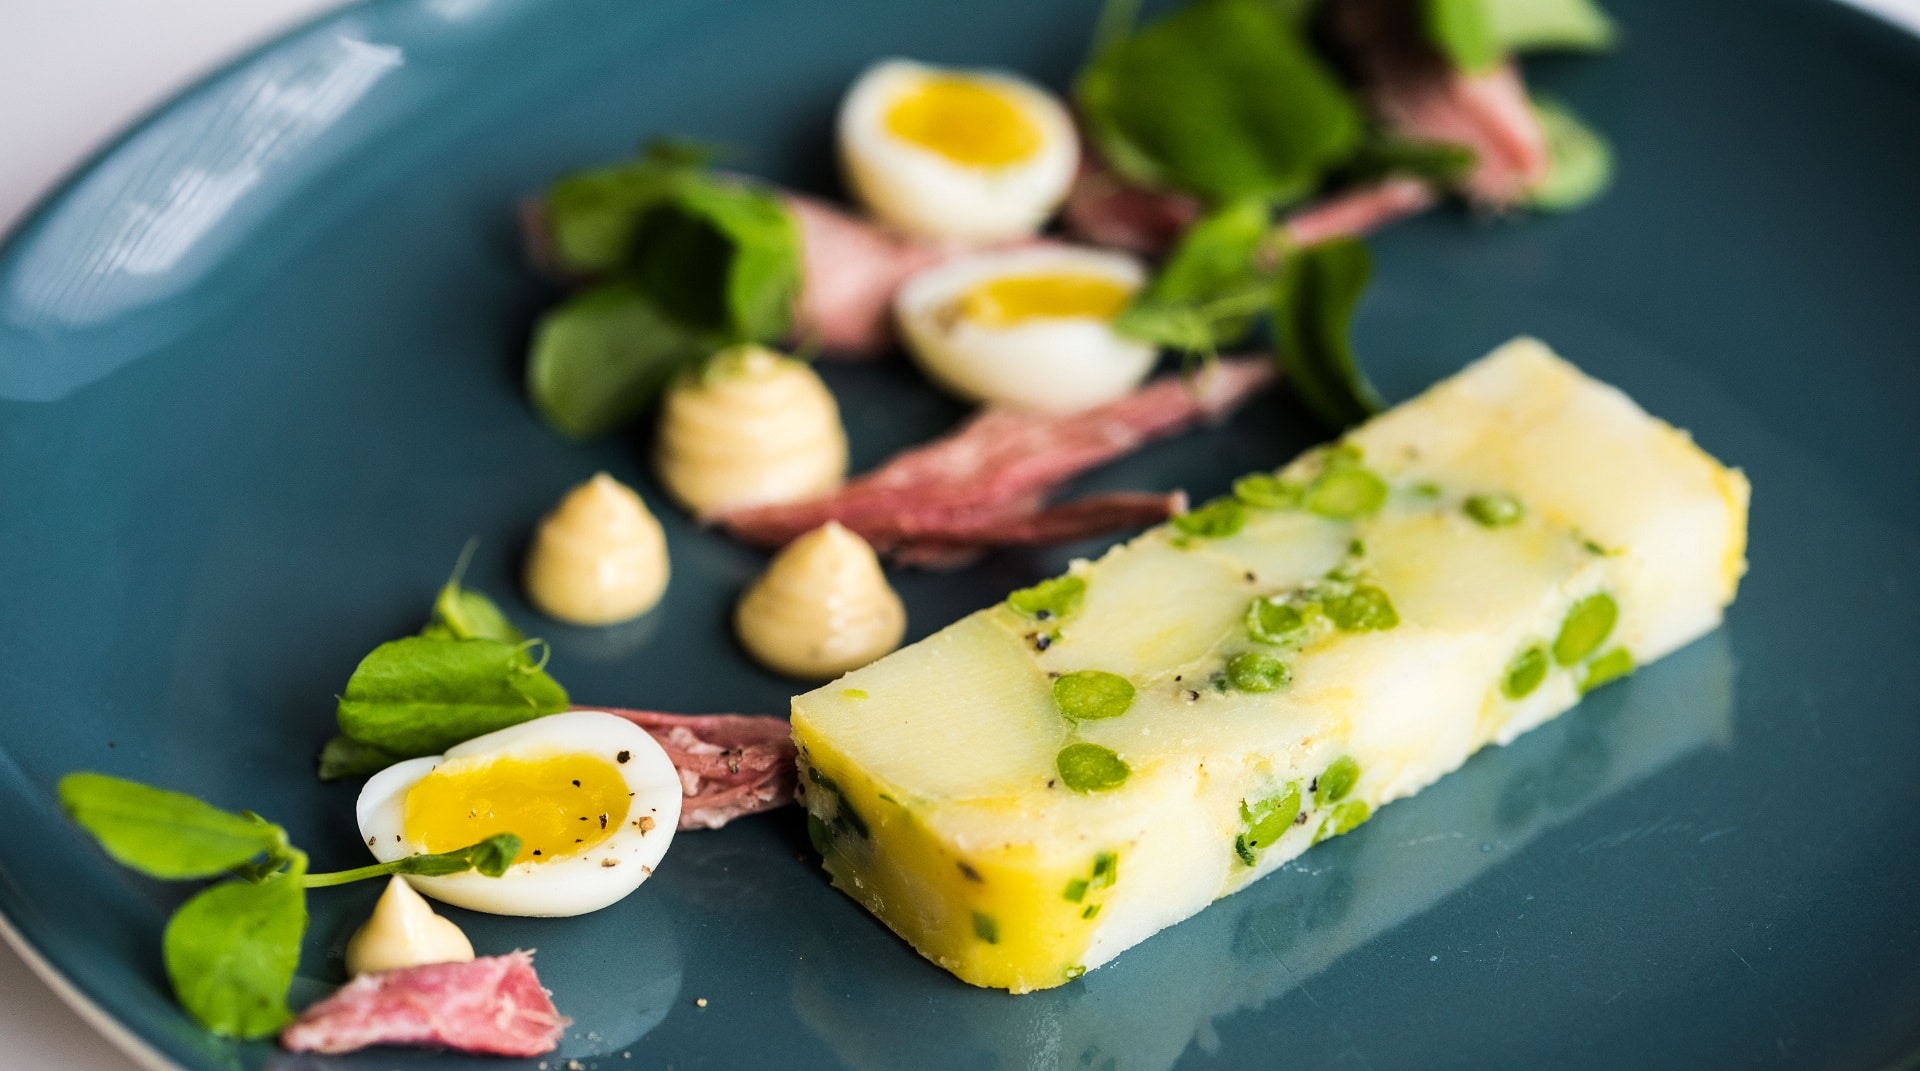 a slice of terrine, made with new potatoes, peas, chives and set with butter, served with ham hock and quails eggs